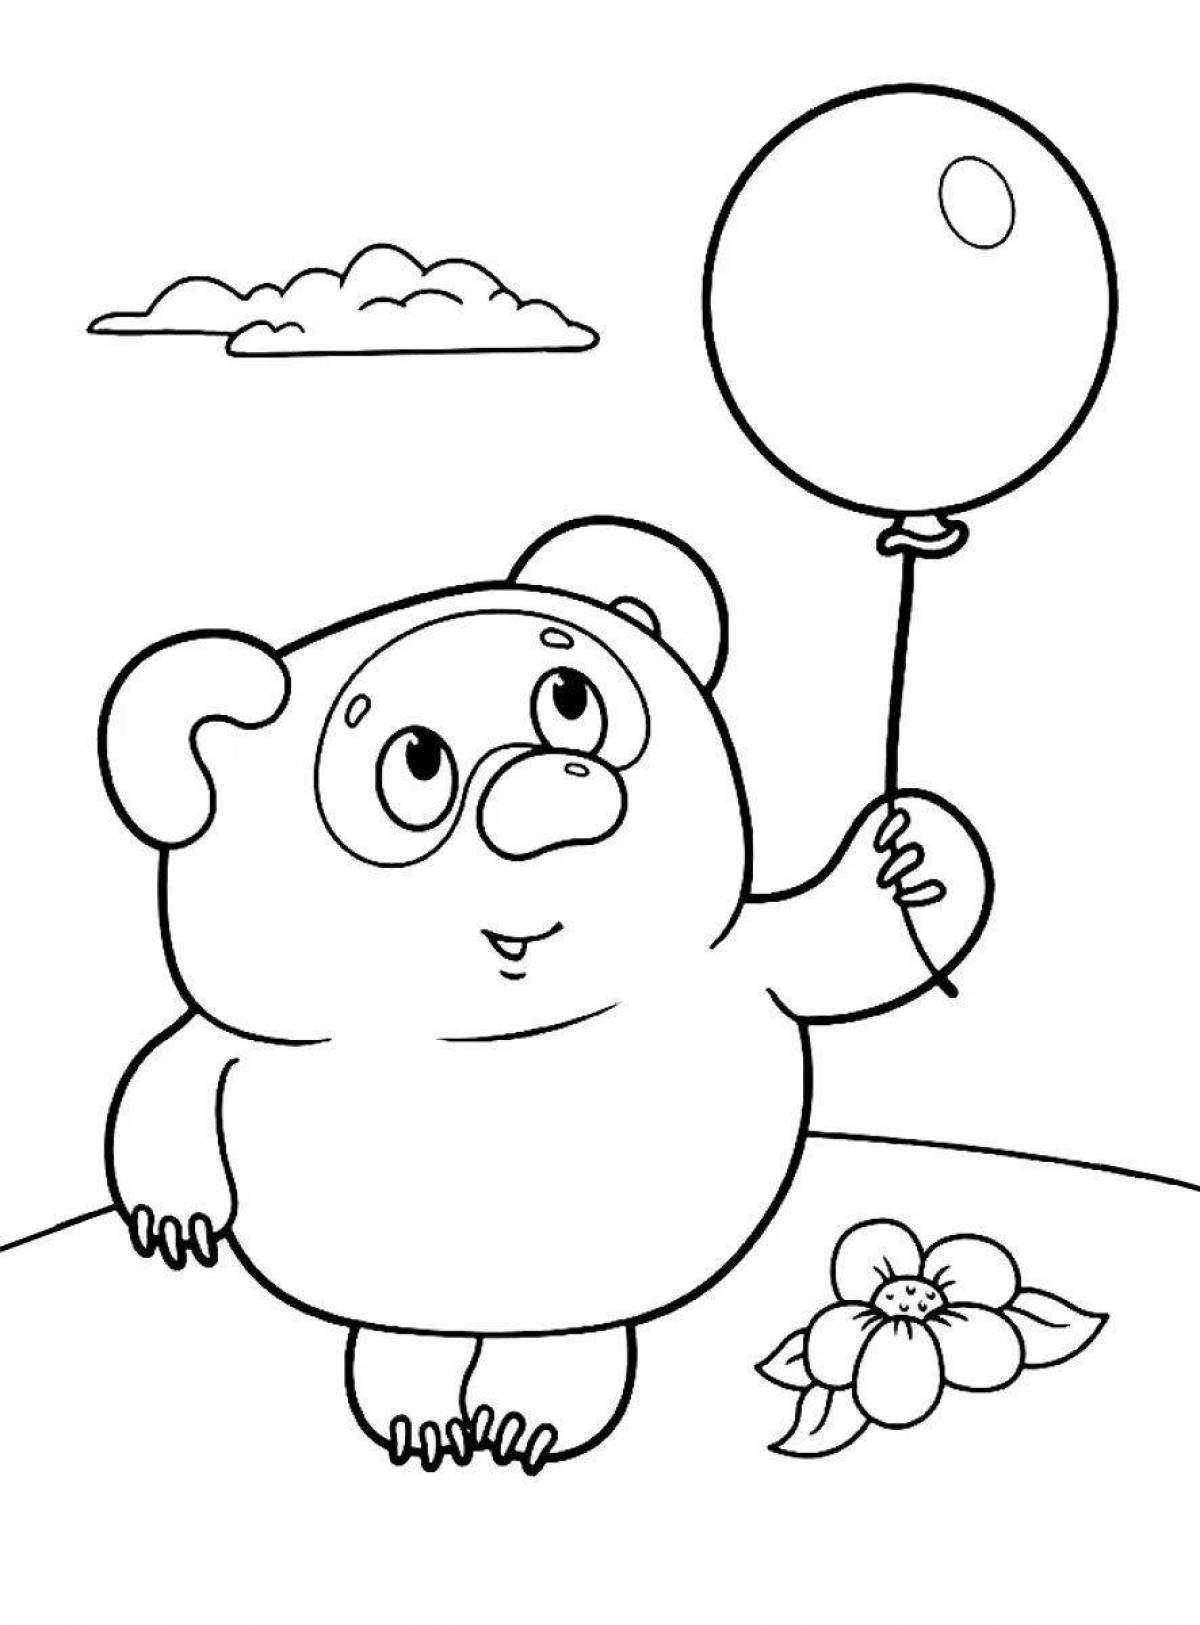 Coloring page glorious winnie the pooh